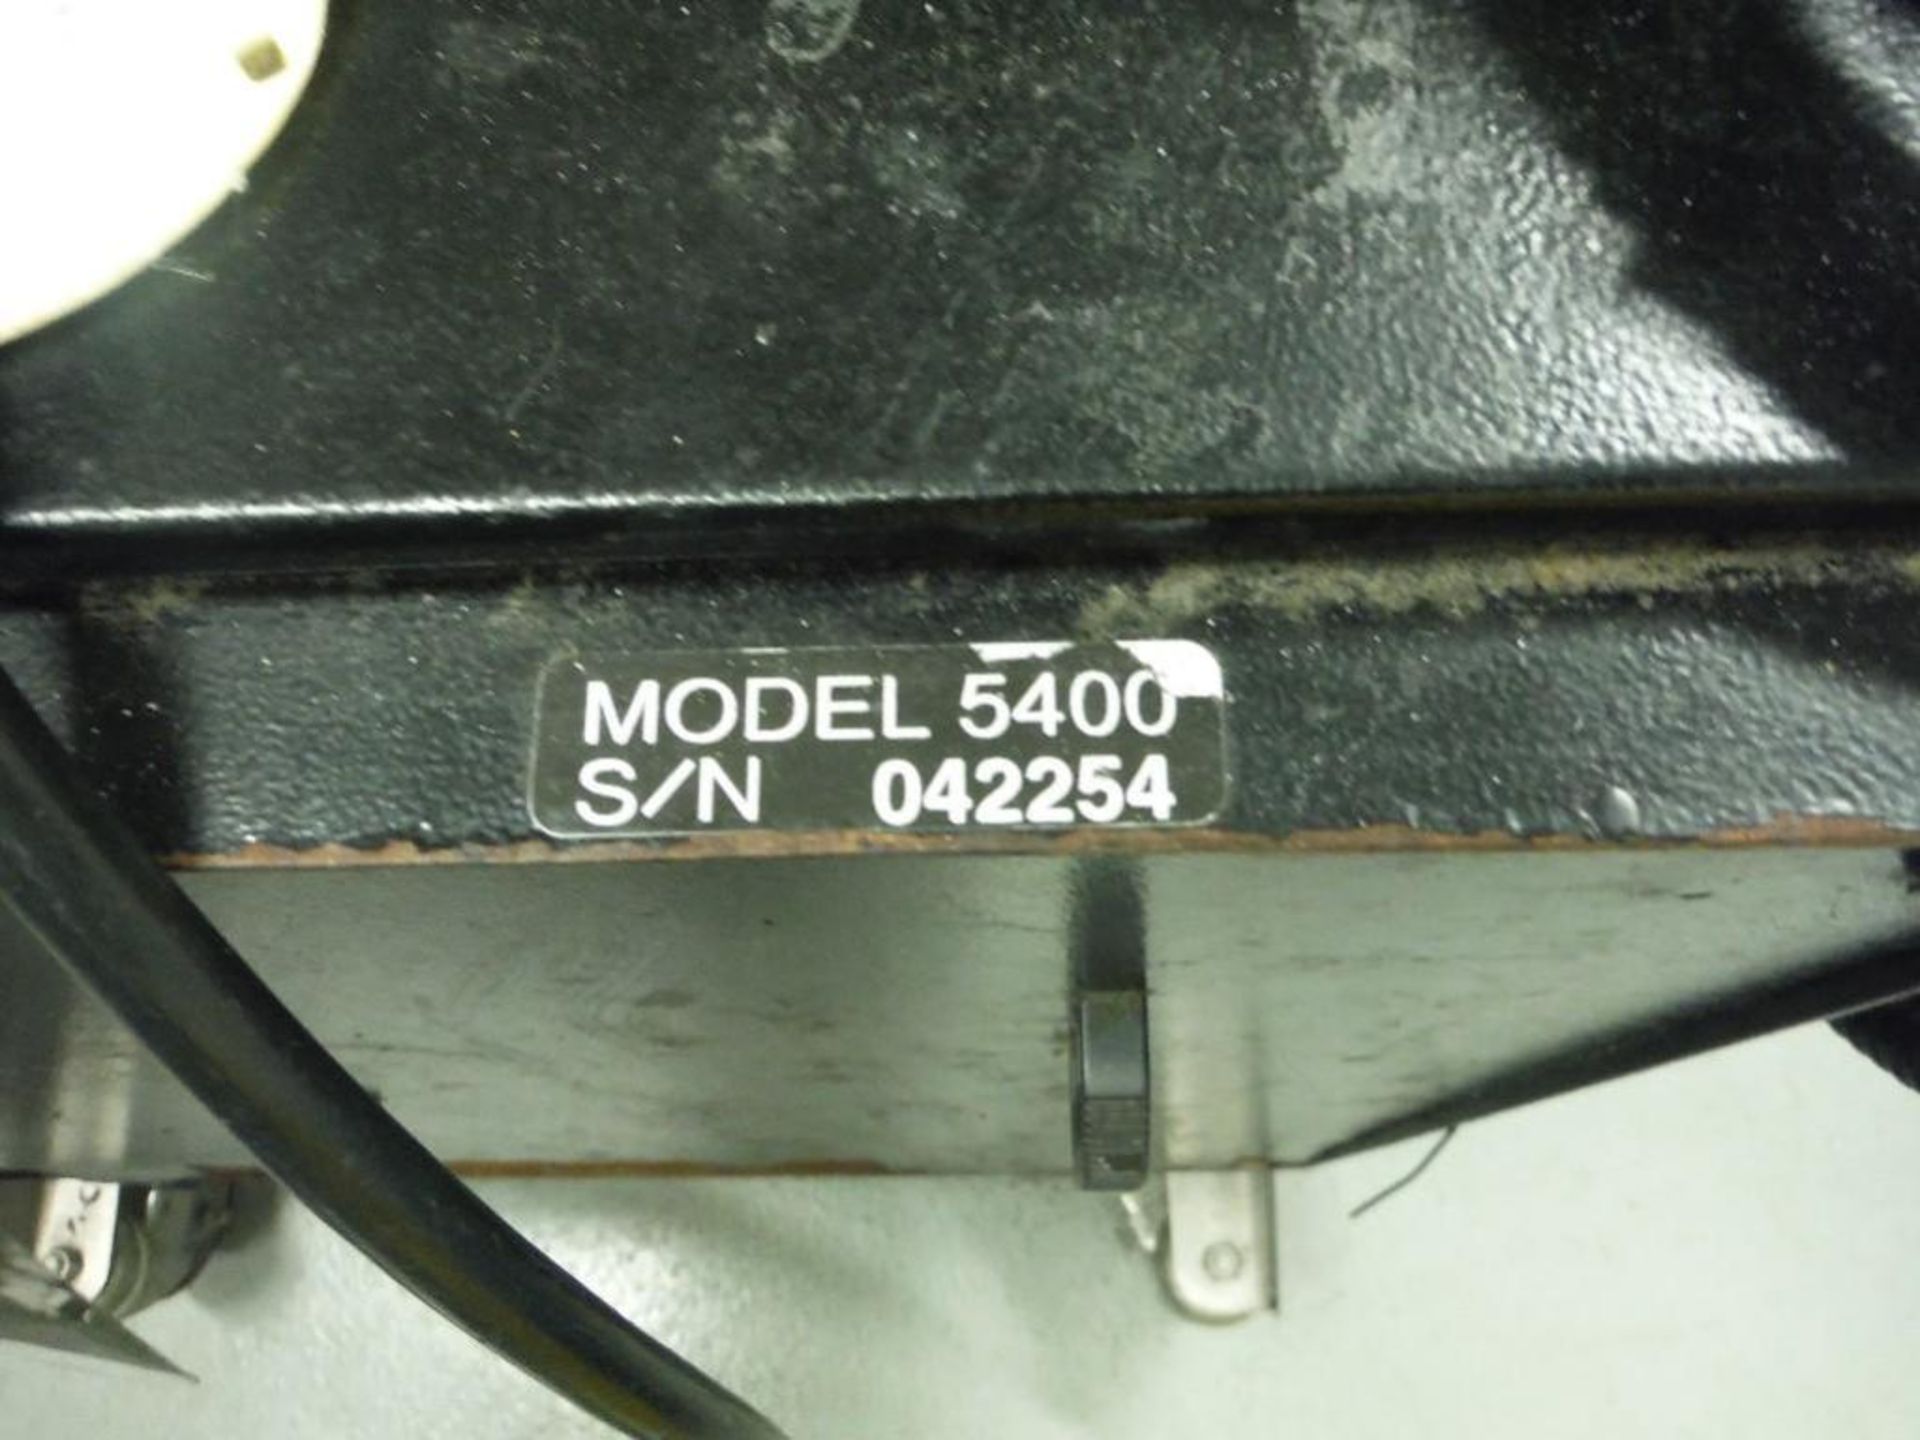 Markem series 5000 coder, Model 5400, SN 042254, parts machine. - RIGGING FEE FOR DOMESTIC TRANSPORT - Image 3 of 4